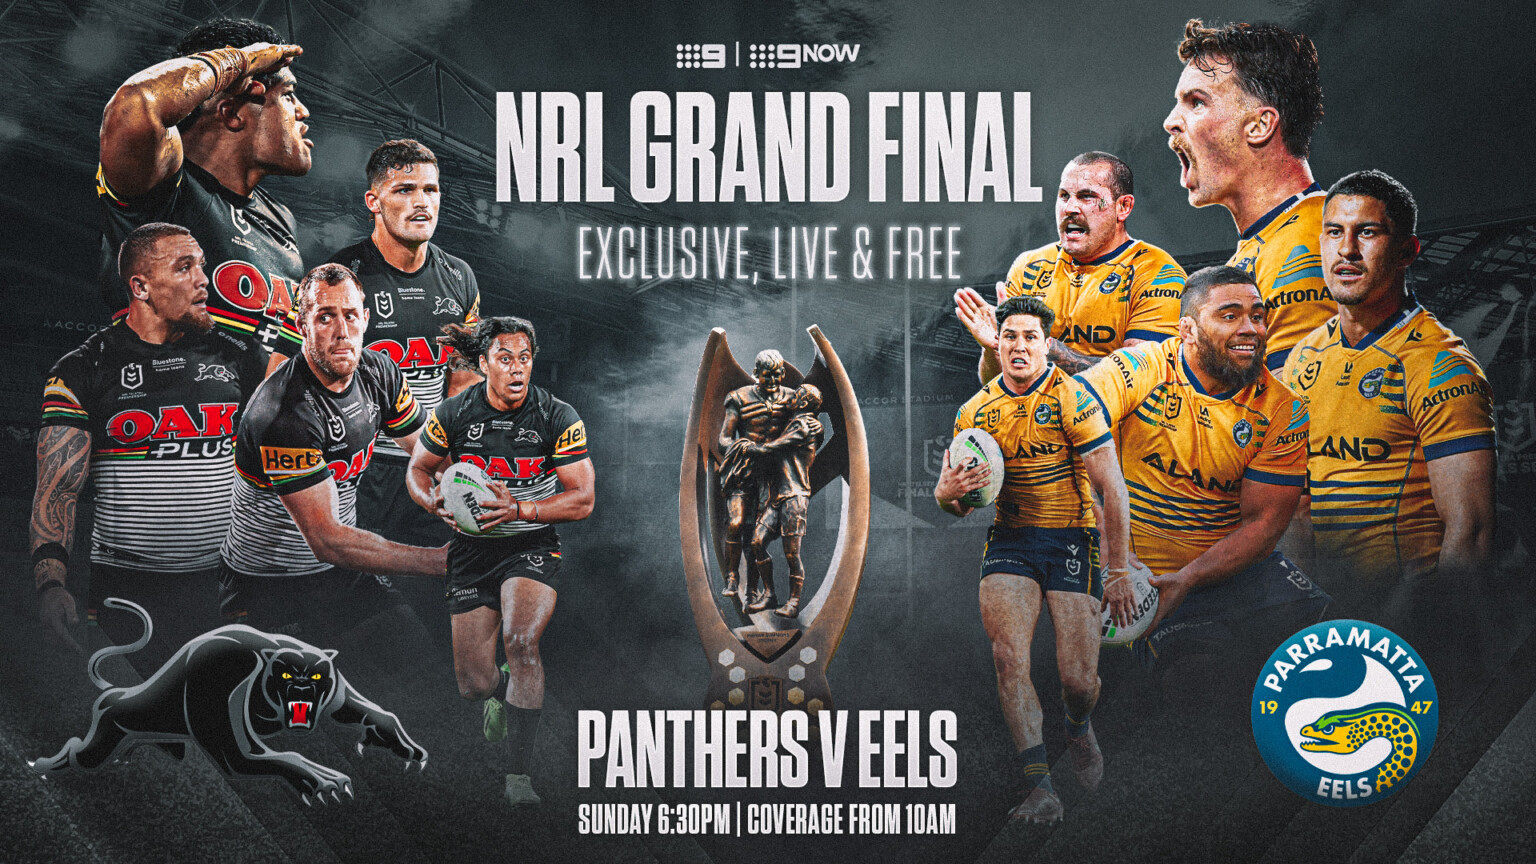 NRL Grand Final exclusive, live and free on Channel 9 and 9Now Nine